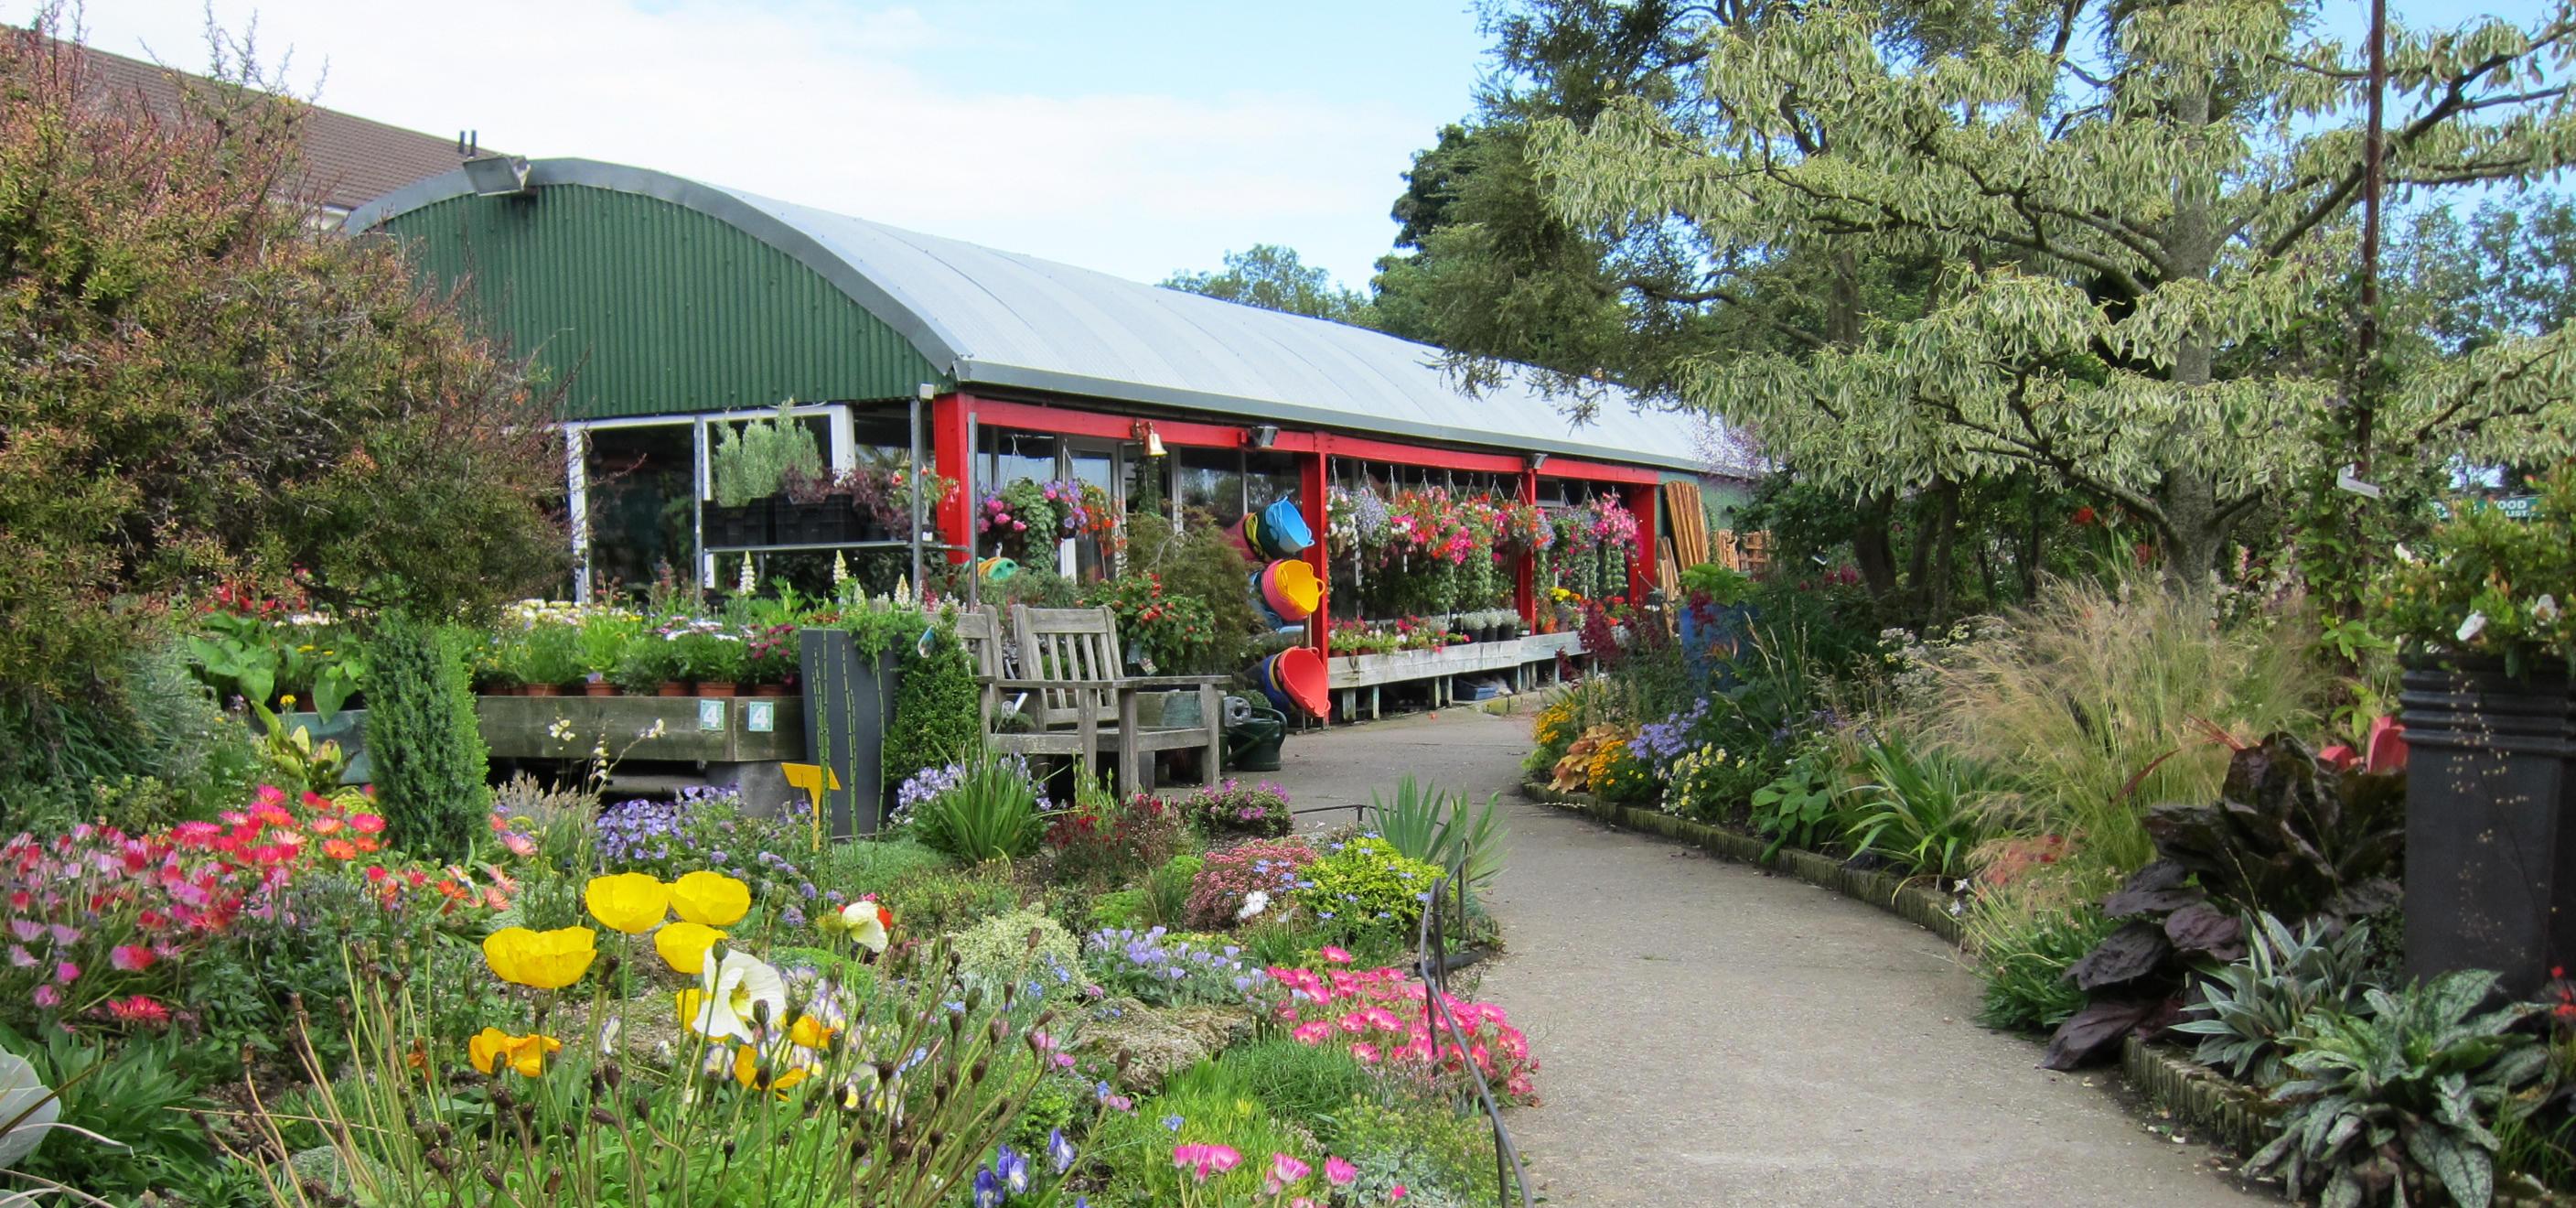 Best 11 Garden Centres In Dun Laoghaire Last Updated August 2021 Golden Pages Goldenpages Ie